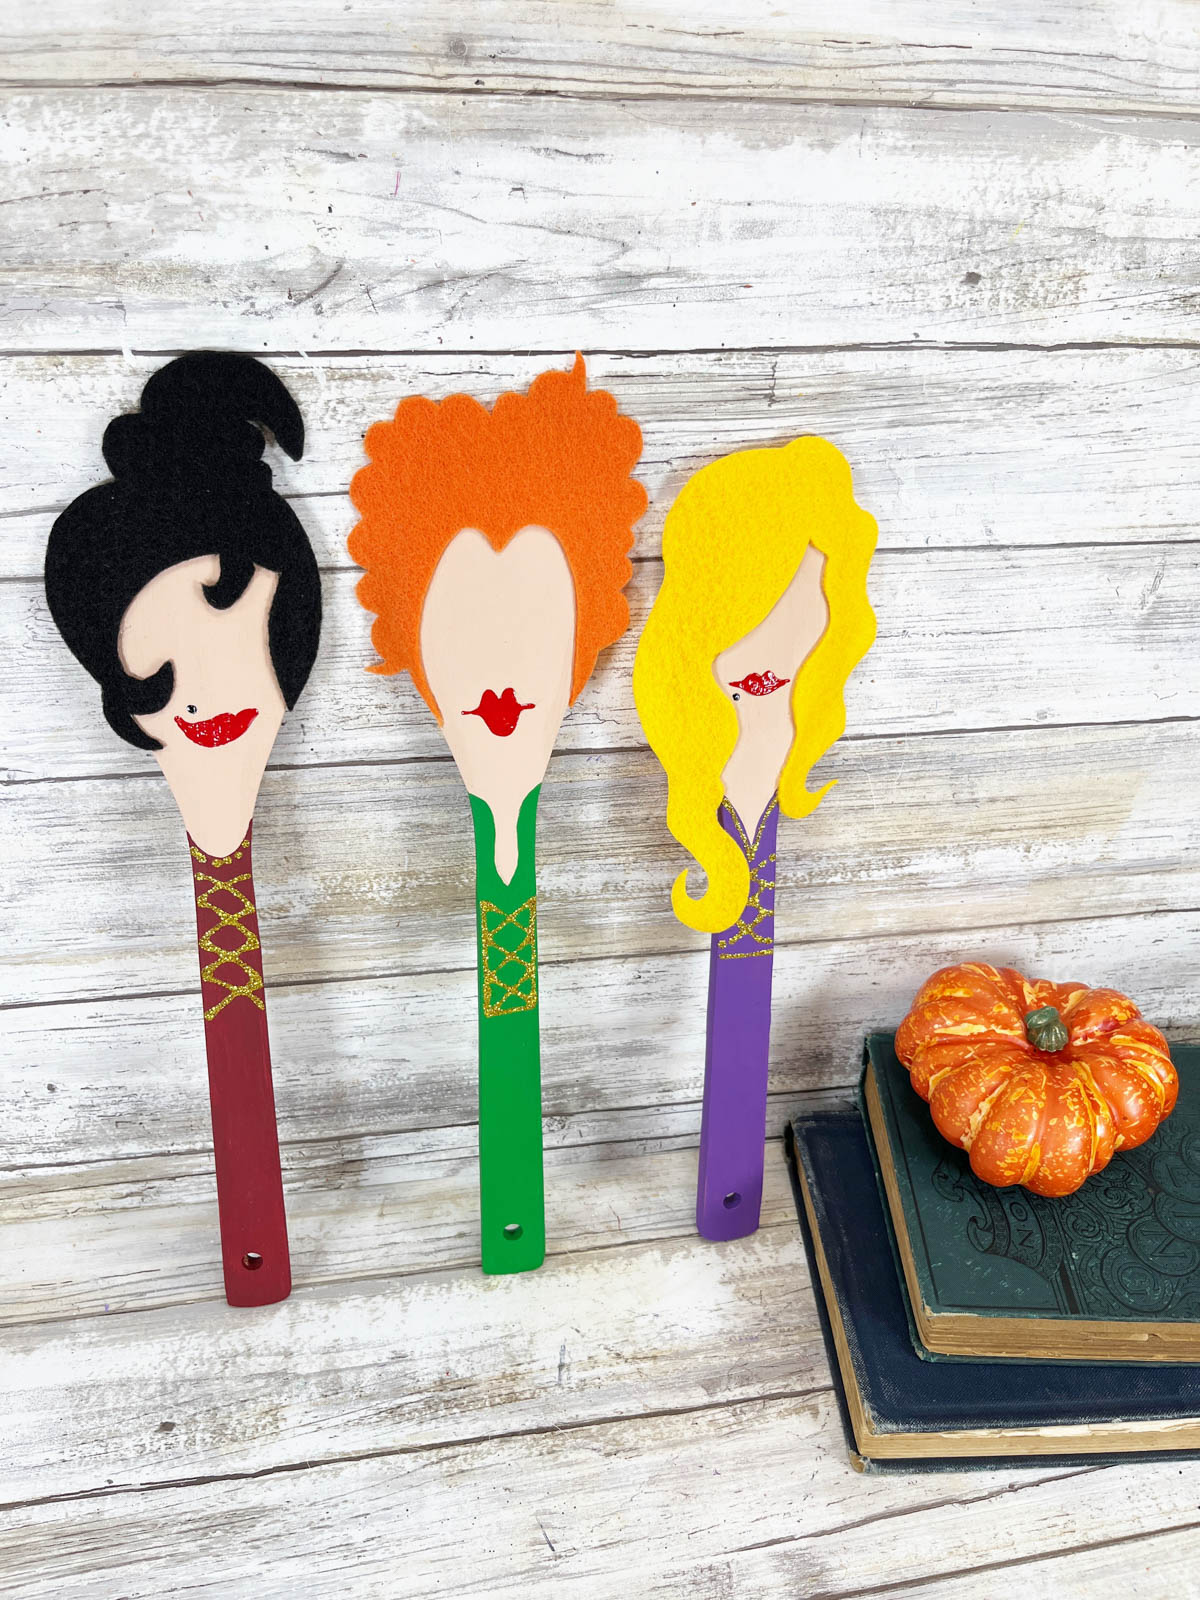 Three witches' spoons on a table next to pumpkins.